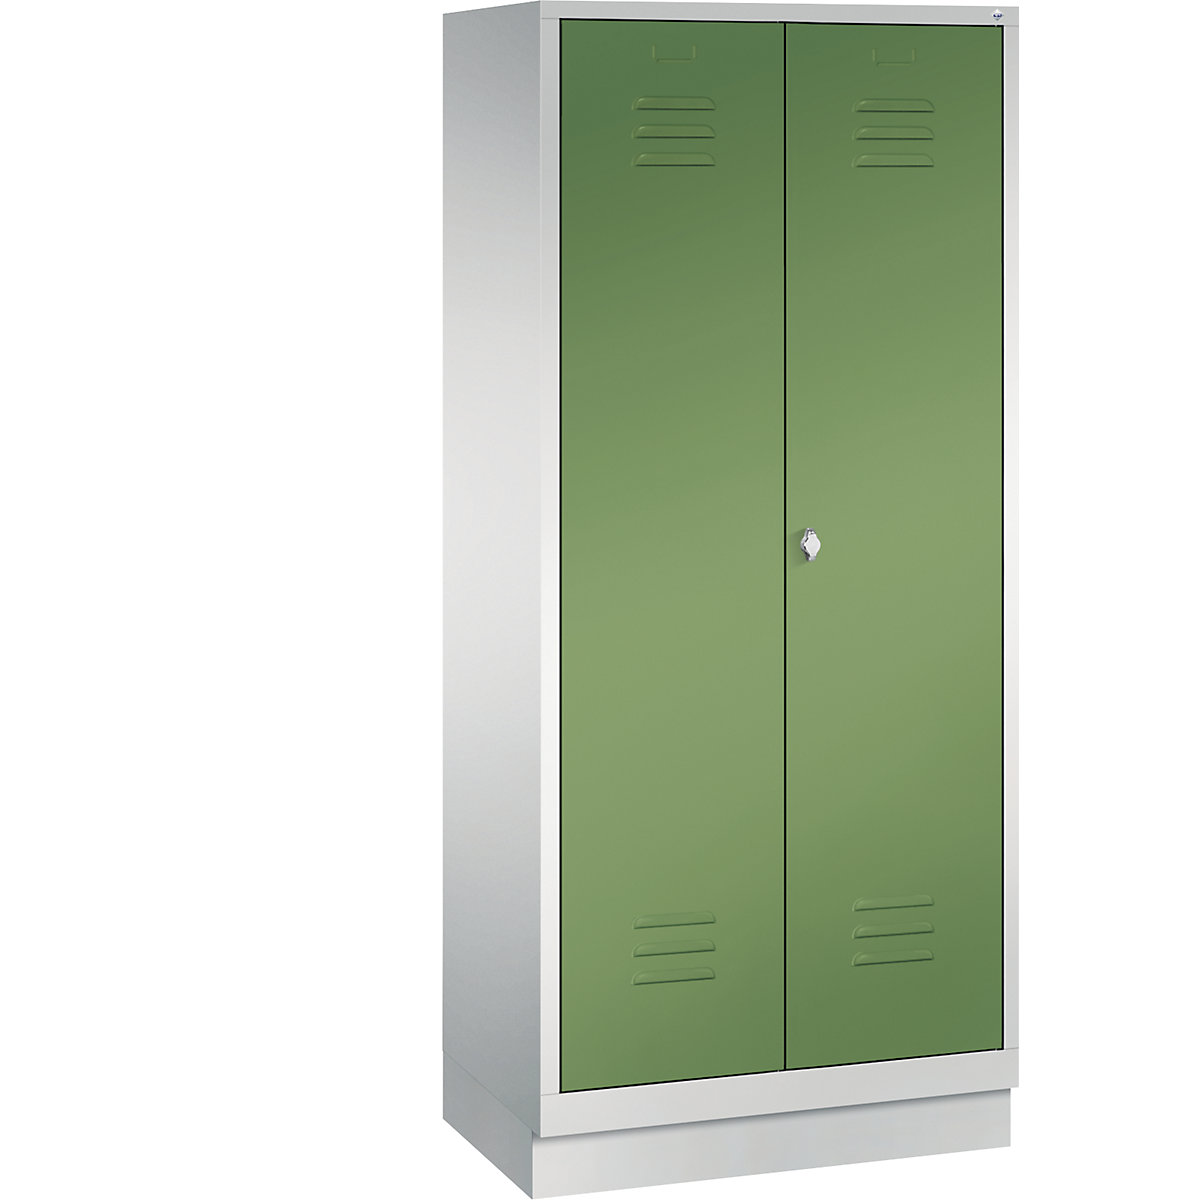 CLASSIC storage cupboard with plinth, doors close in the middle – C+P, 2 compartments, compartment width 400 mm, light grey / reseda green-7